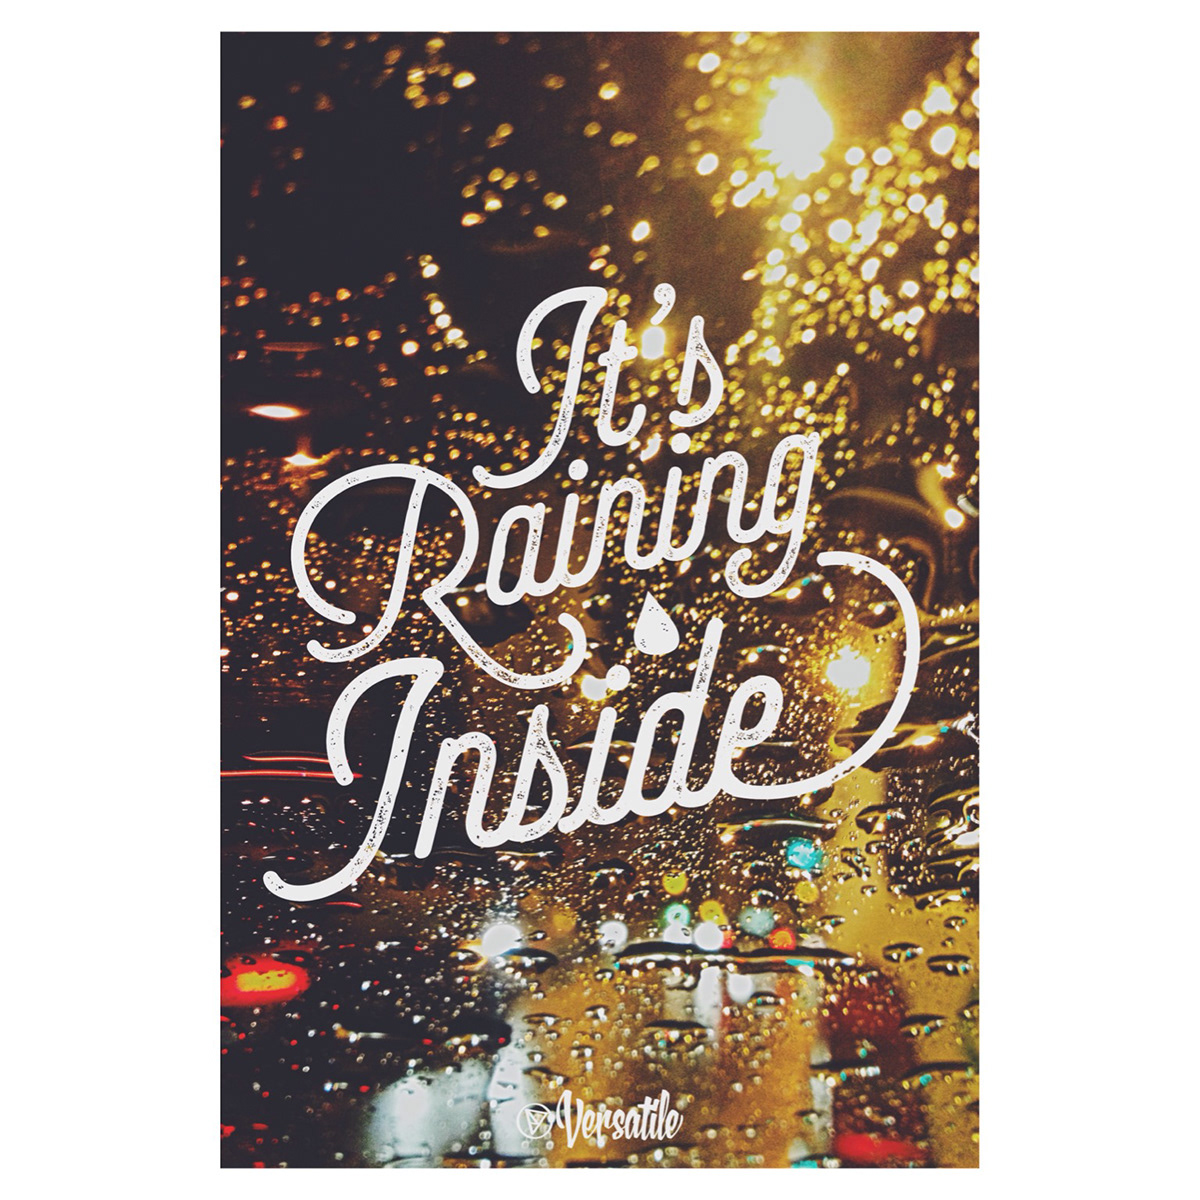 type typo poster graphic design rain lluvia tipo handmade selfie font cool color lettering letter